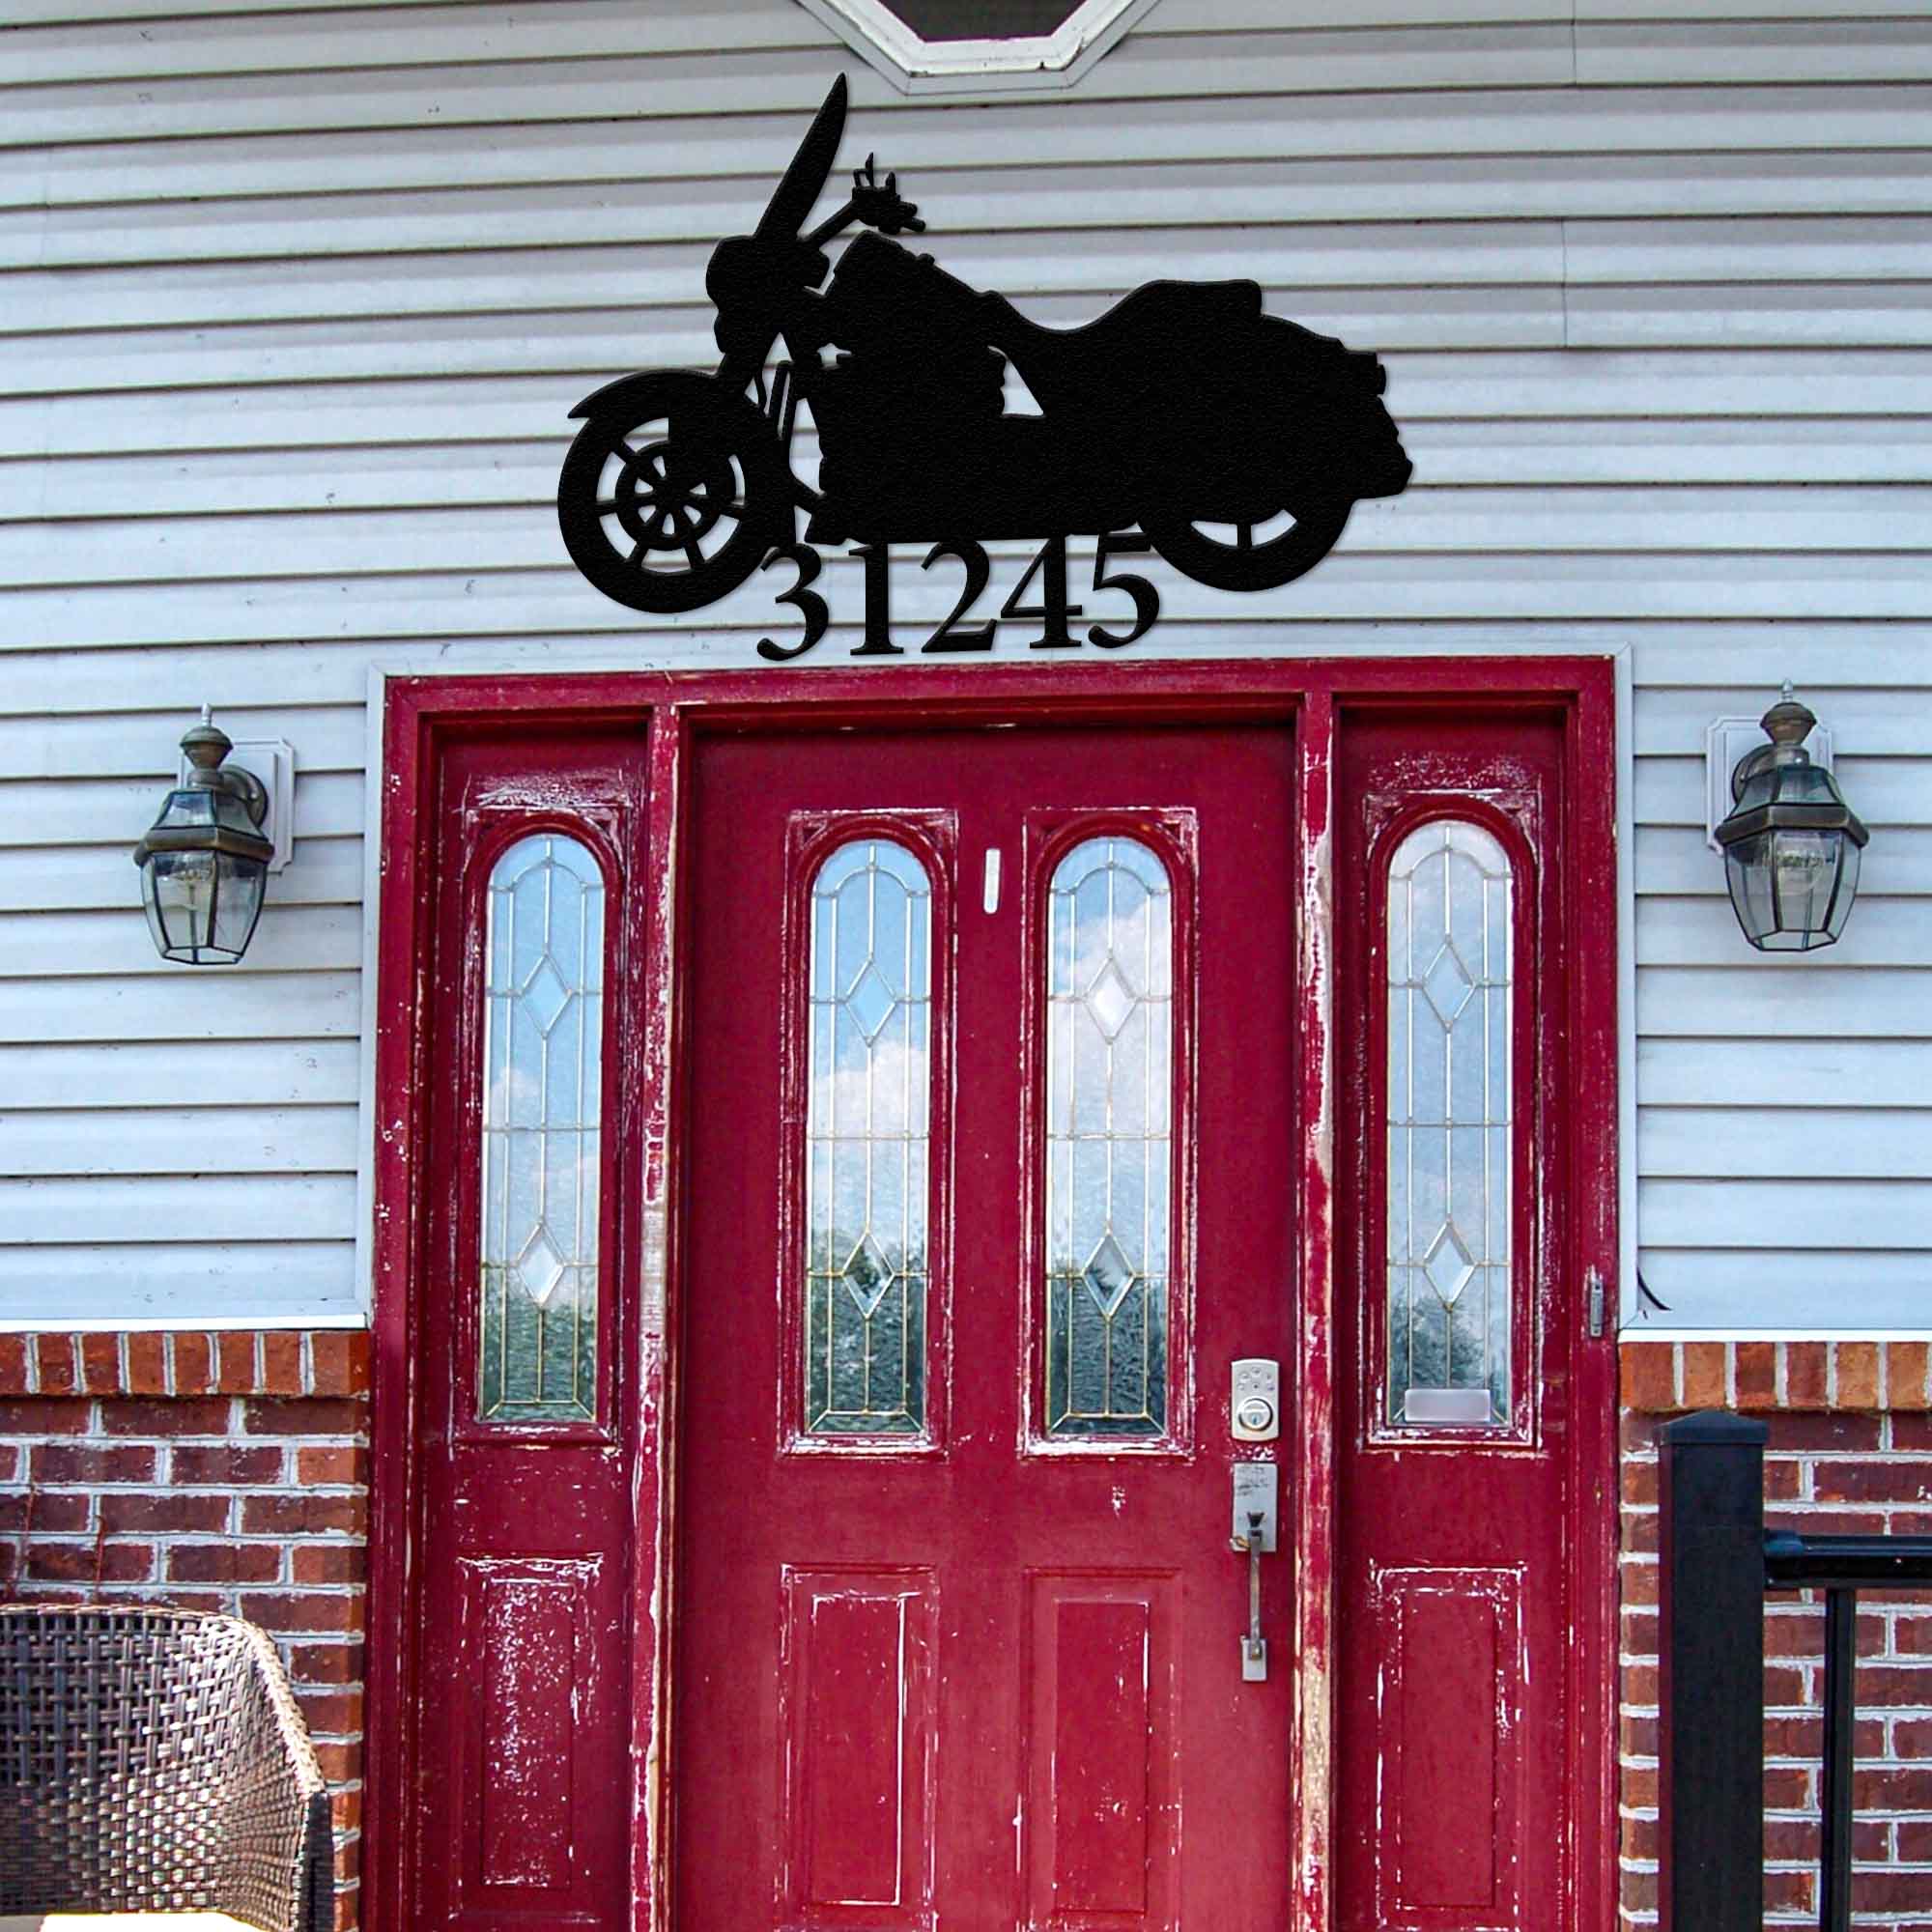 Classic Motorcycle - Personalized Metal Home Address Sign Metal Art - Throttle Mania